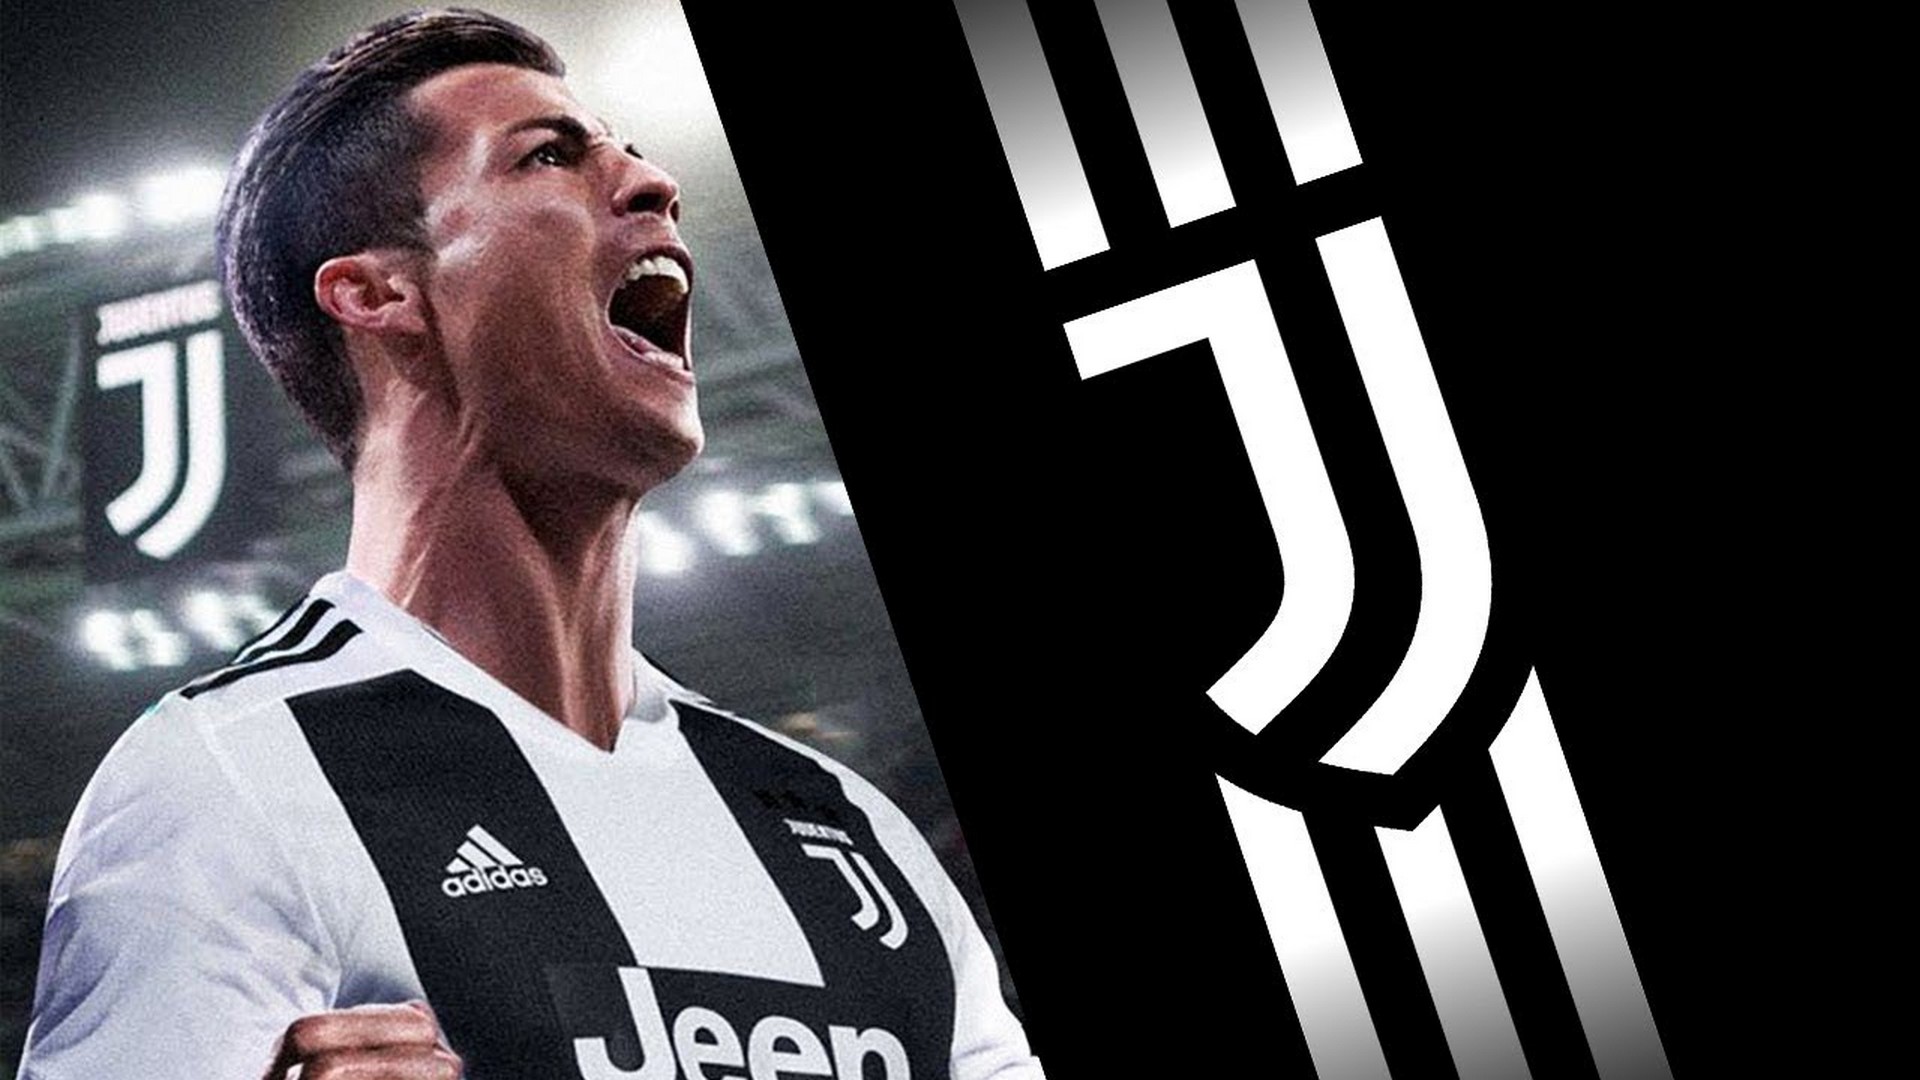 C Ronaldo Juventus Wallpaper with image resolution 1920x1080 pixel. You can use this wallpaper as background for your desktop Computer Screensavers, Android or iPhone smartphones